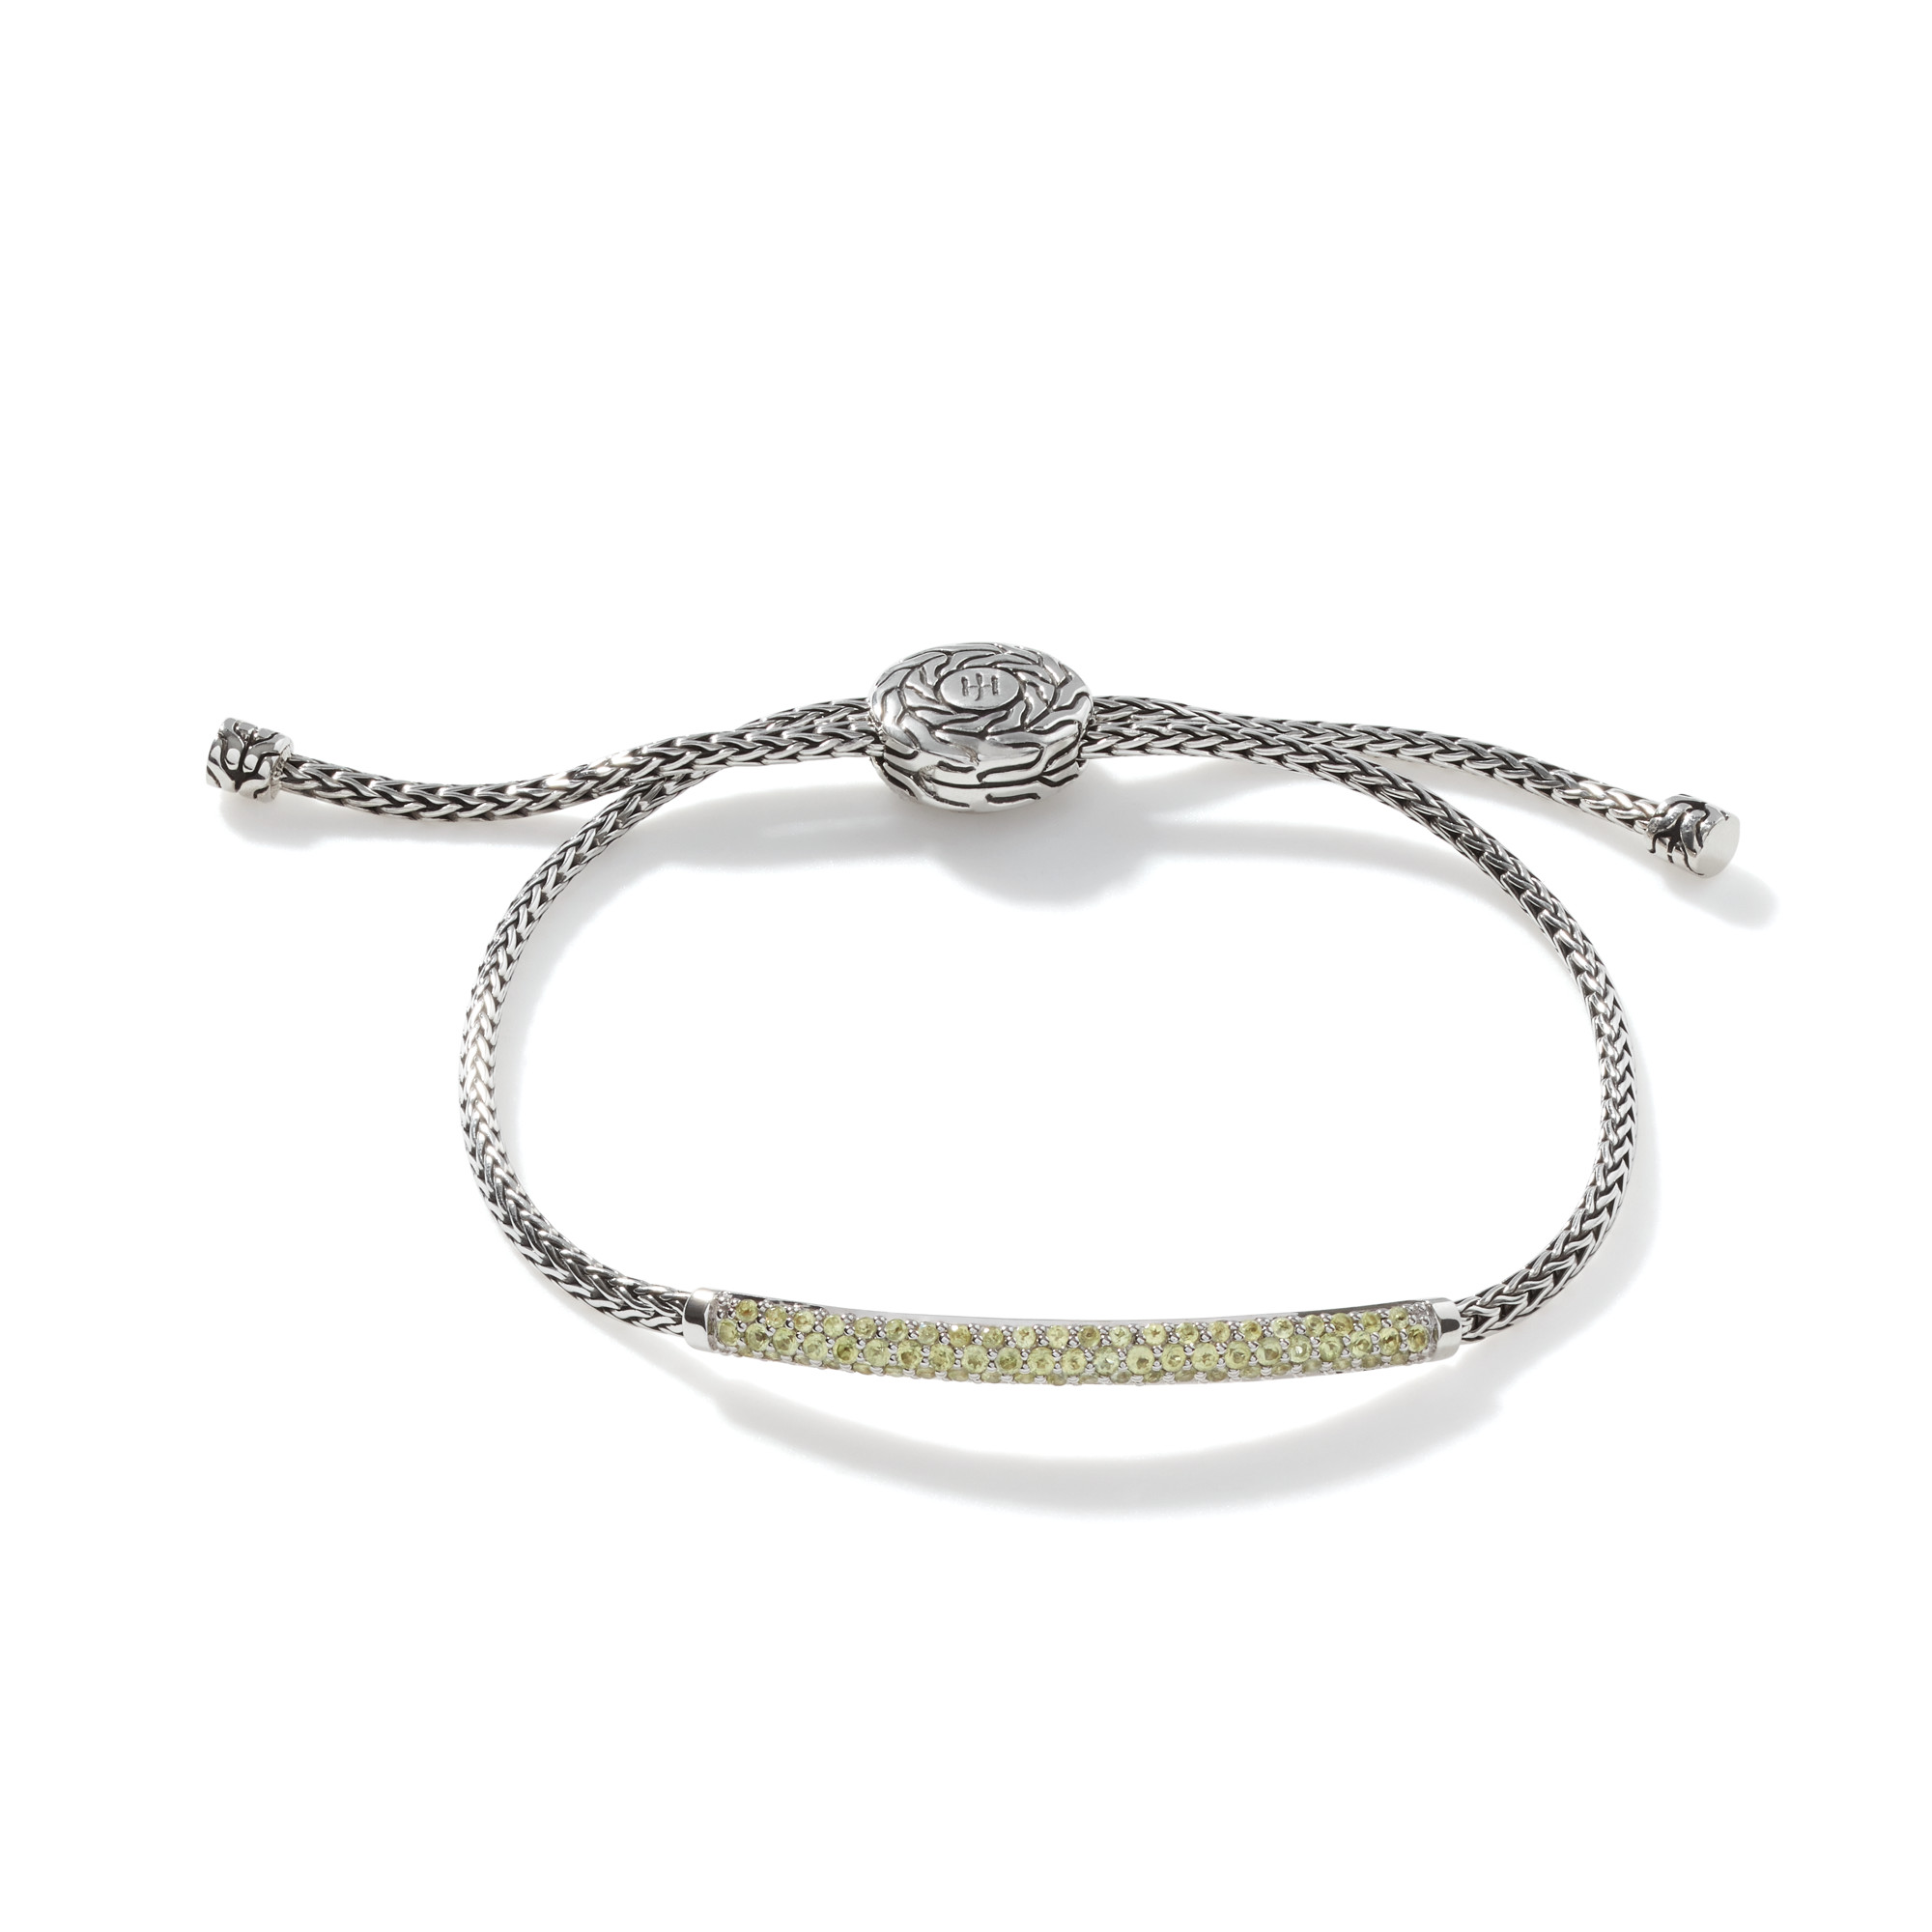 This bracelet by John Hardy is crafted from sterling silver and features peridots.